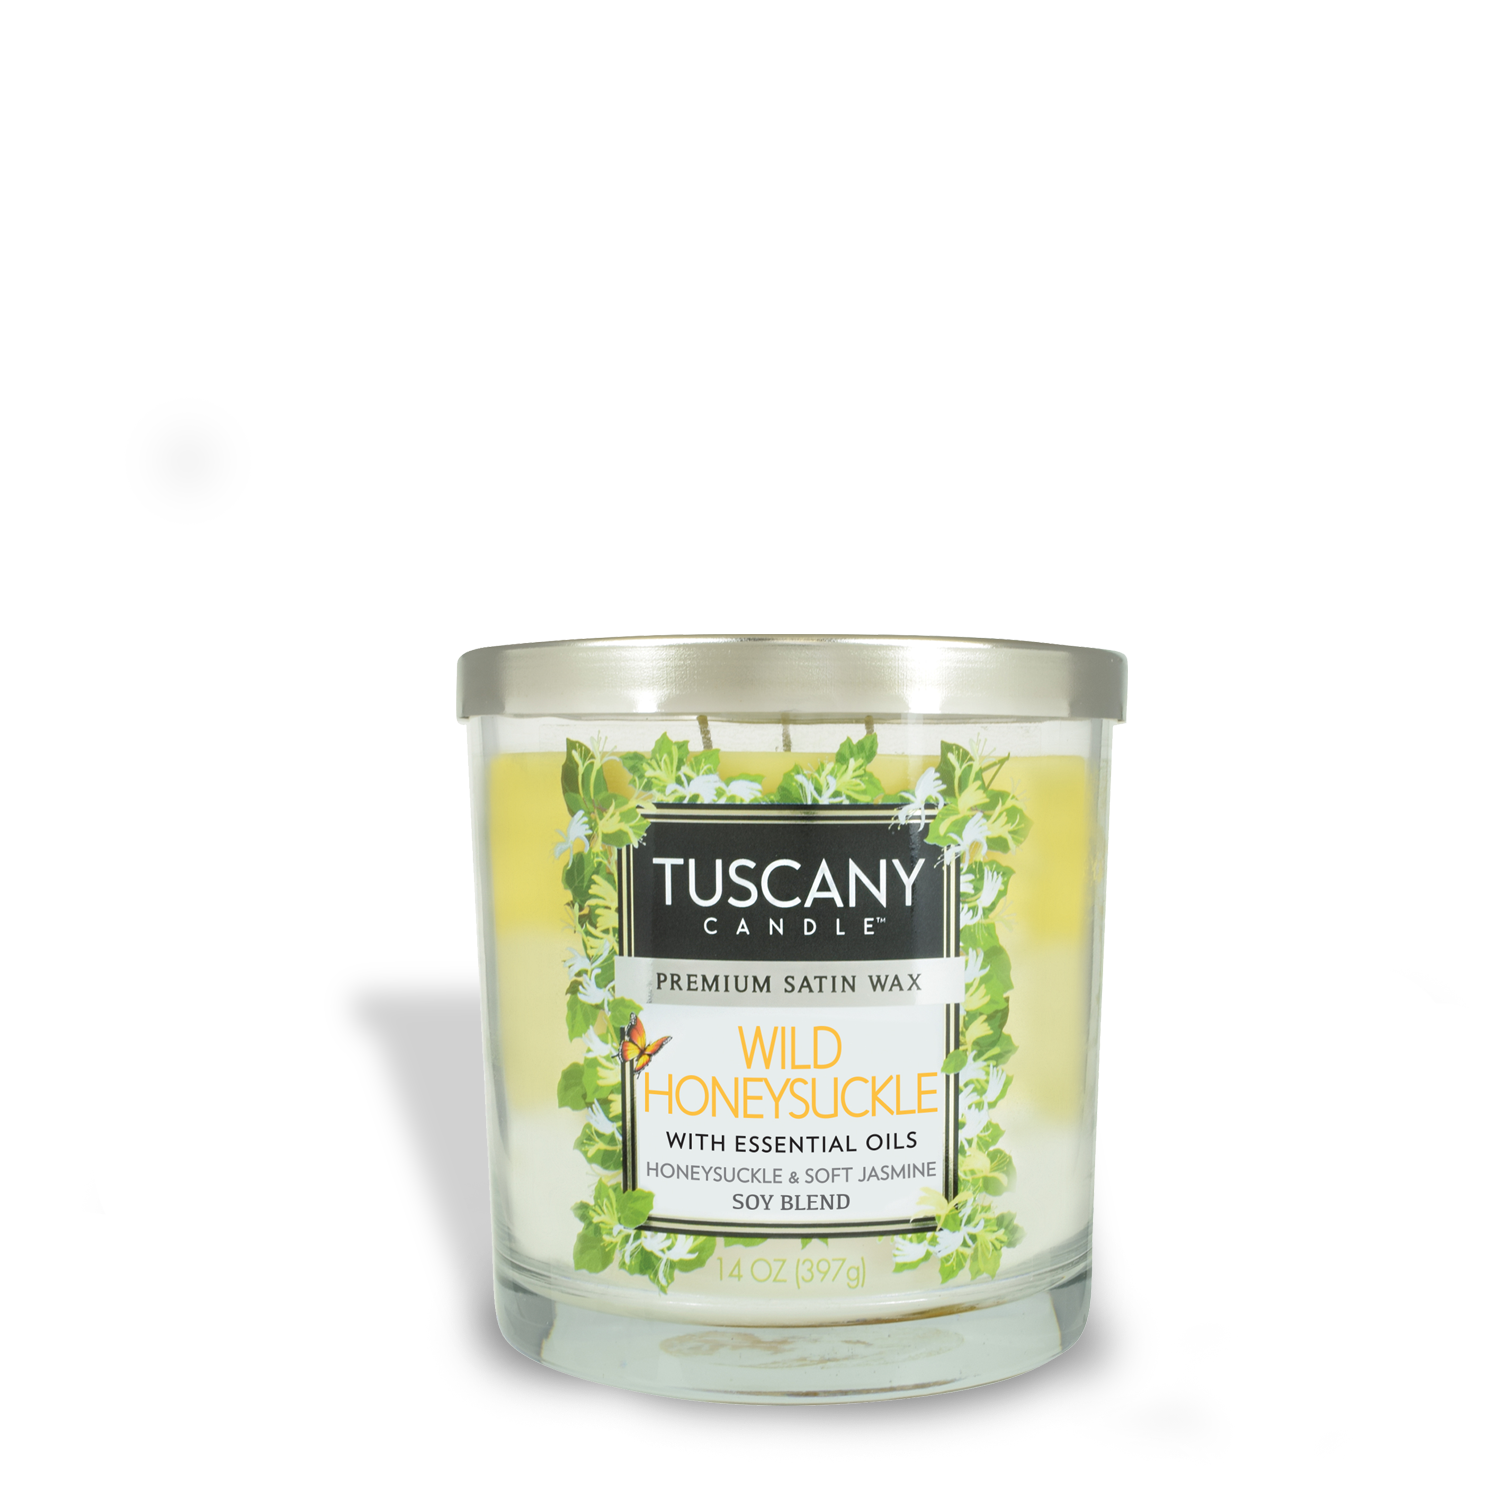 Tuscany Wild Honeysuckle Long-Lasting Scented Jar Candle (14 oz) with a touch of Wild Honeysuckle.